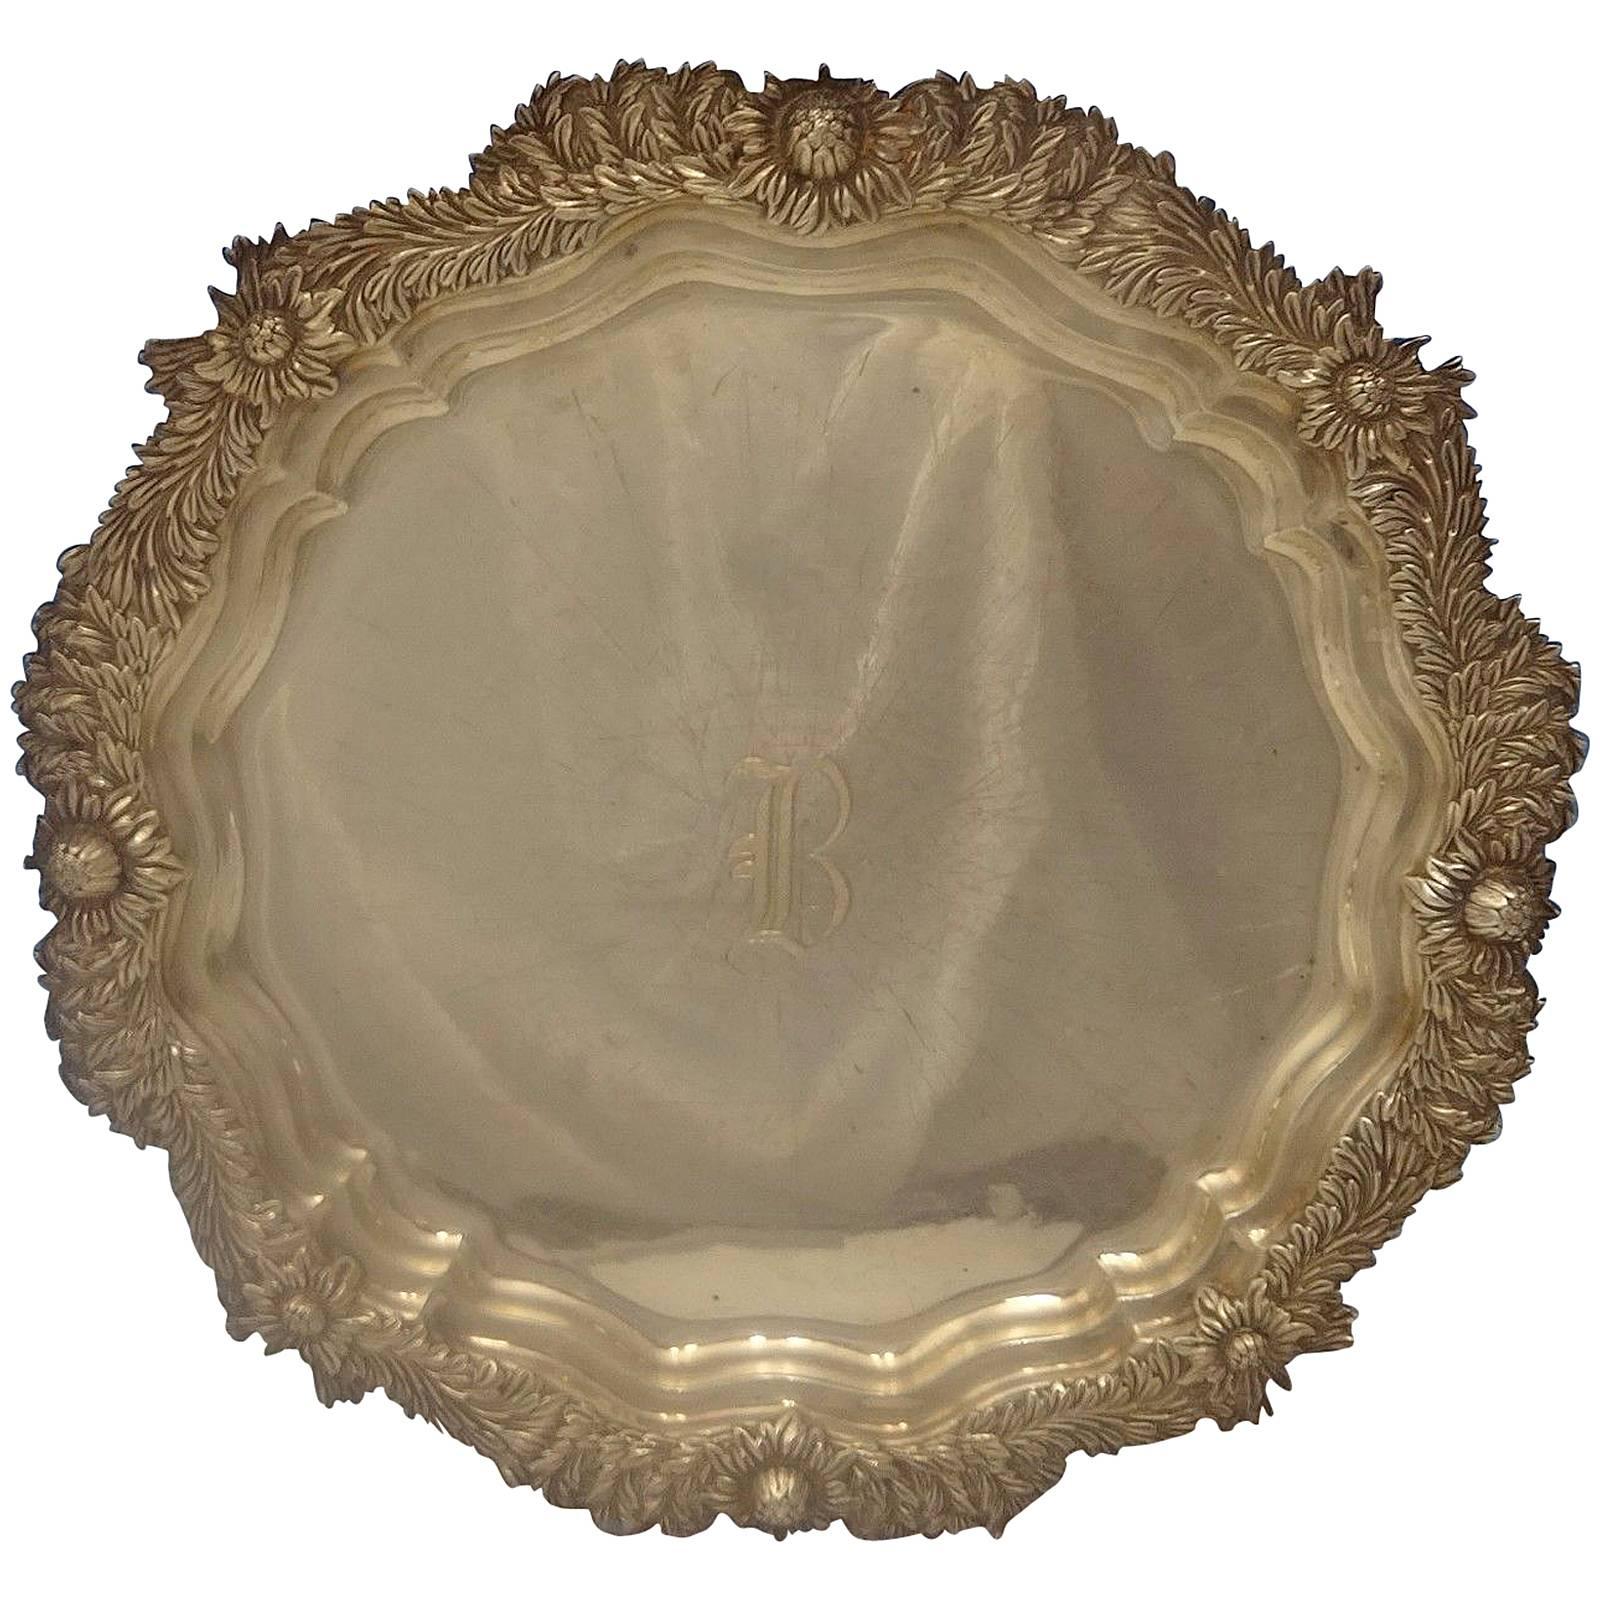 Marvellous Chrysanthemum by Tiffany & Co. sterling silver salver tray. It features an octagonal shape with eight large raised chrysanthemums. It has a 